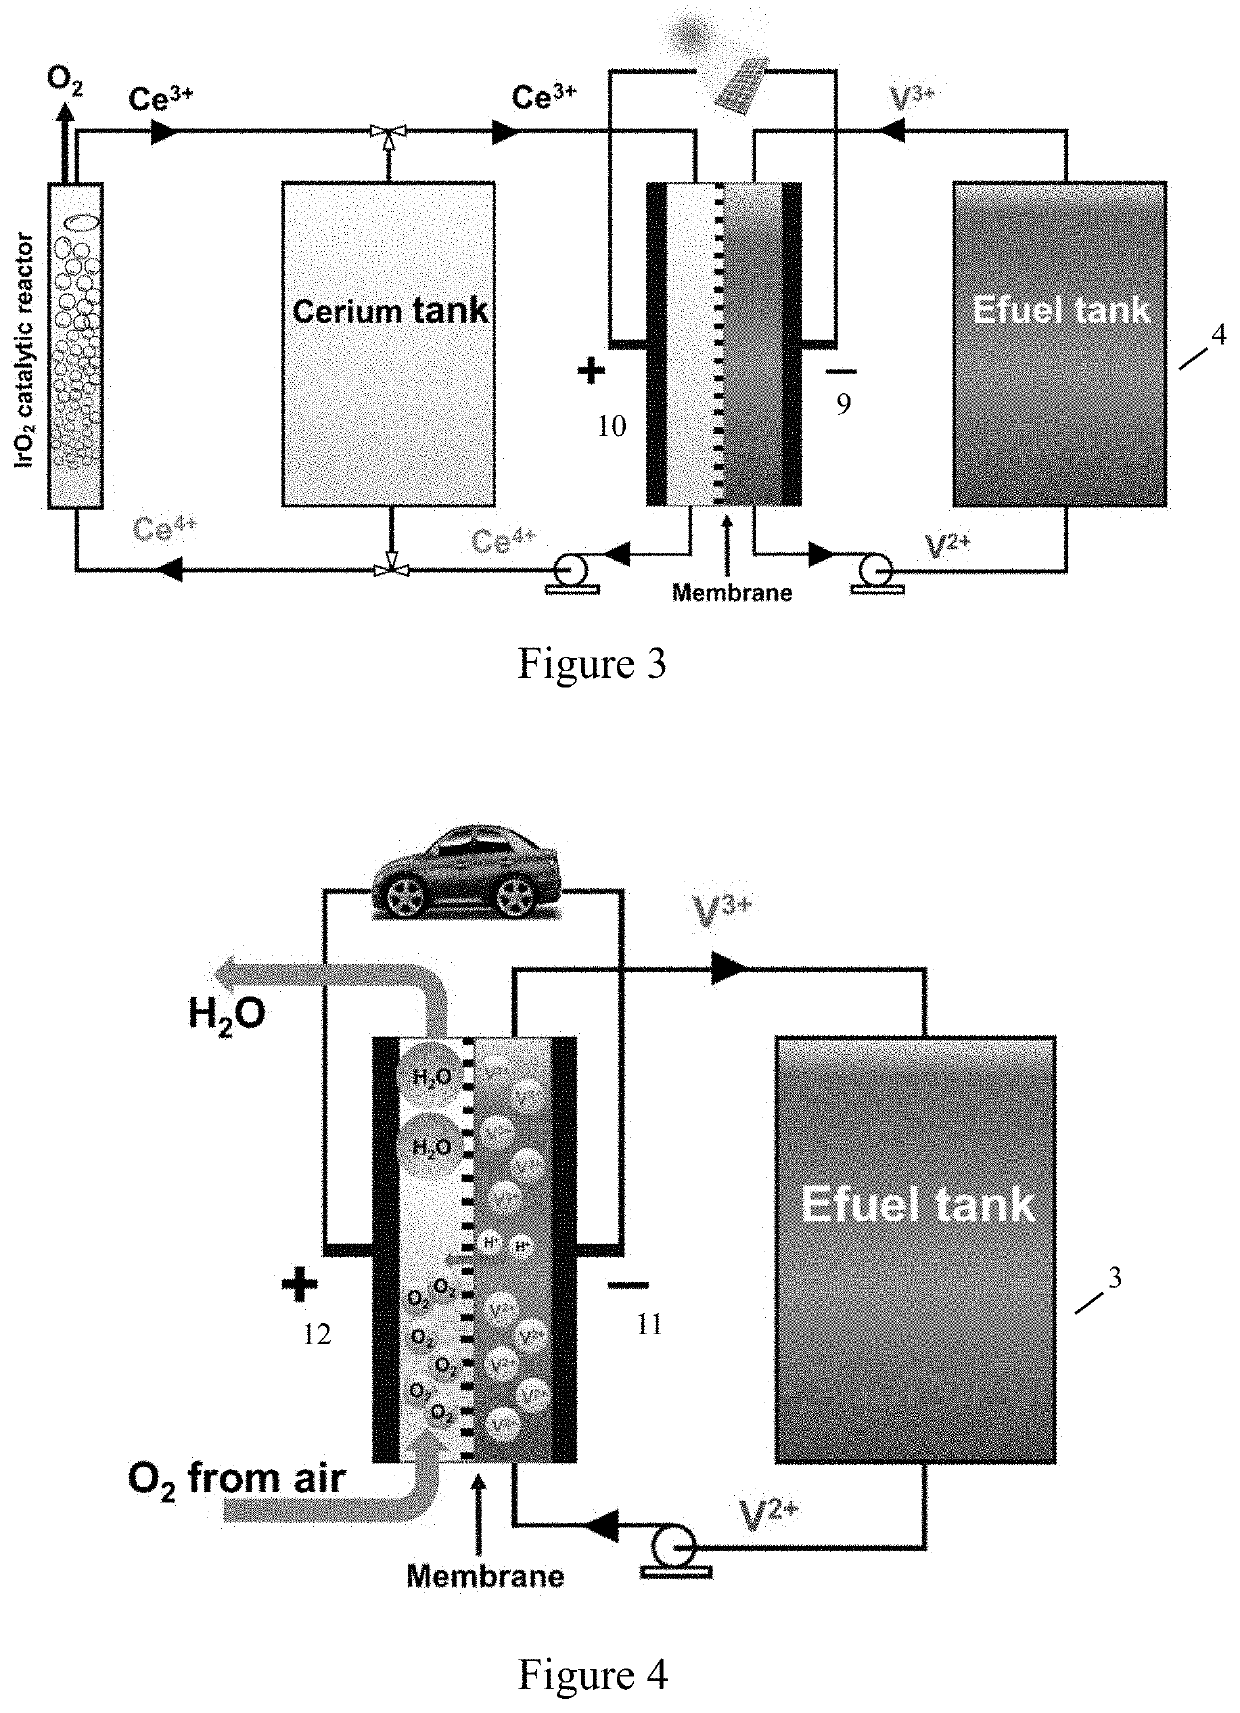 Electro-fuel energy storage system and method